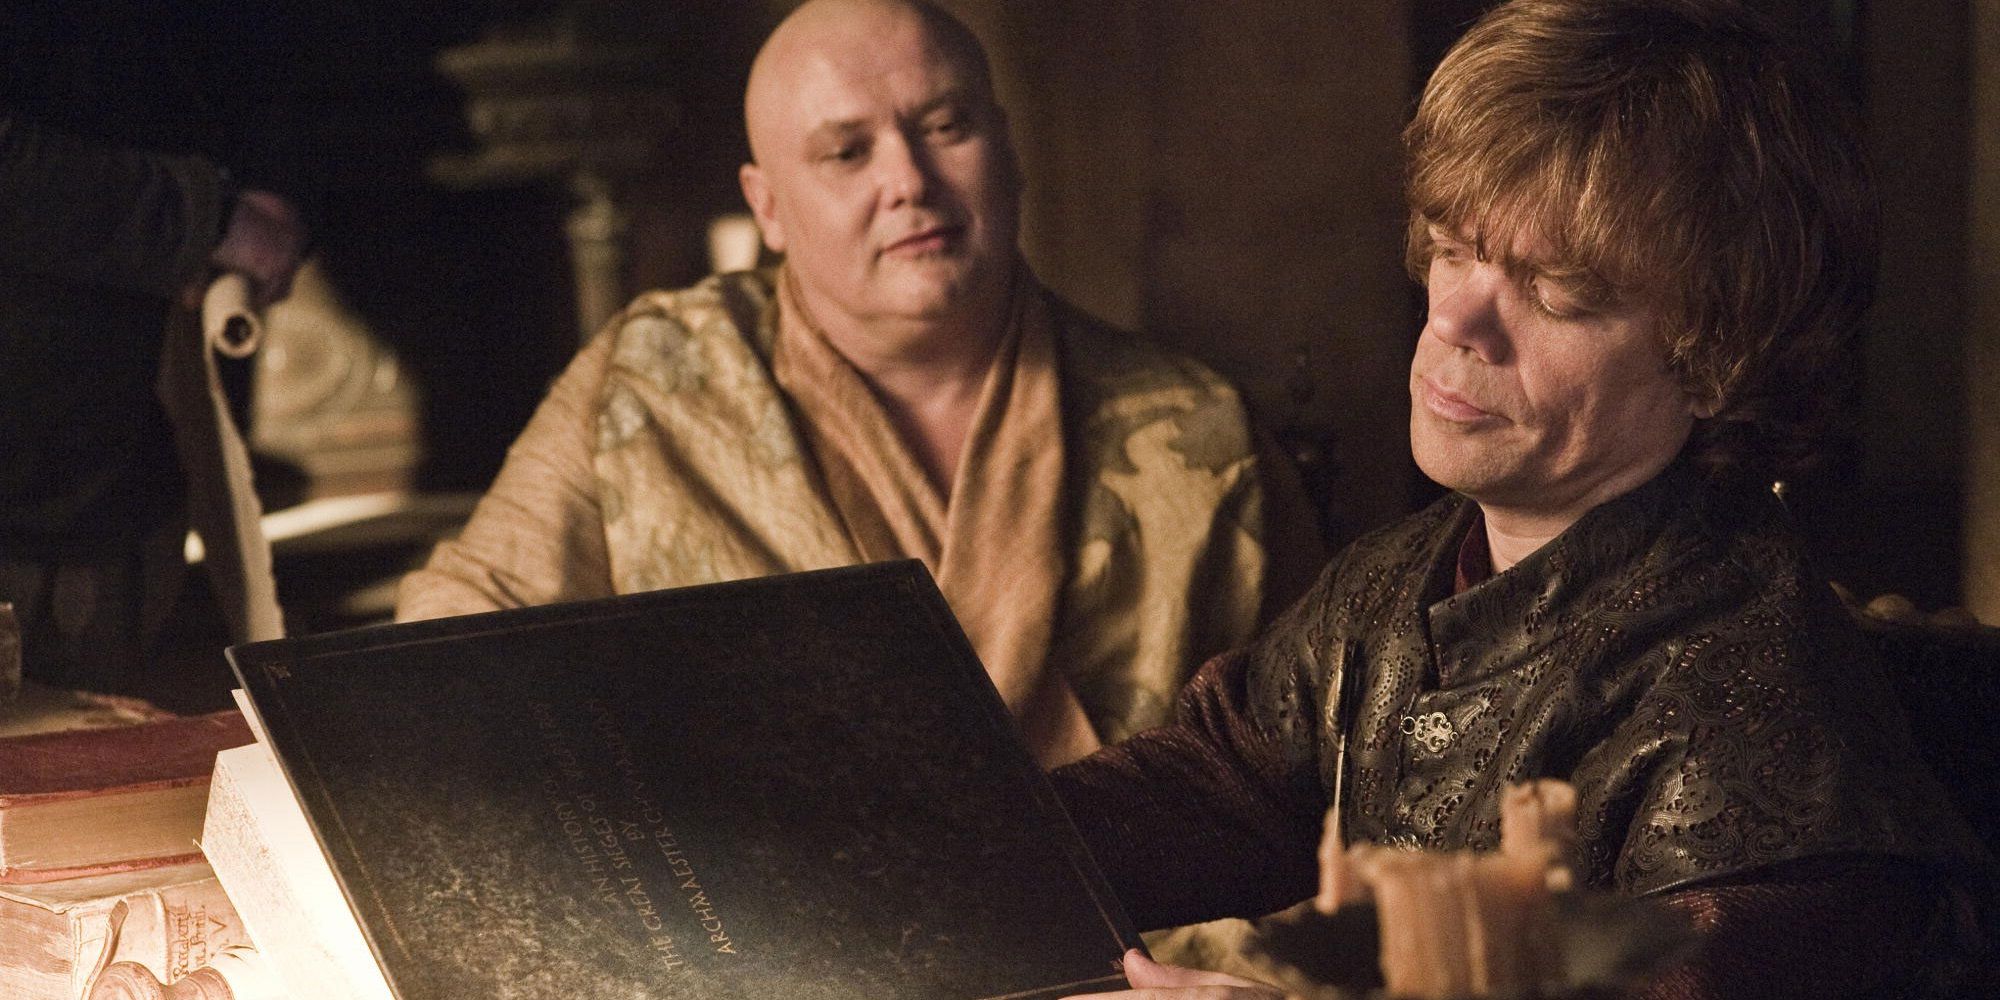 Tyrion Lannister reading a book with Varys